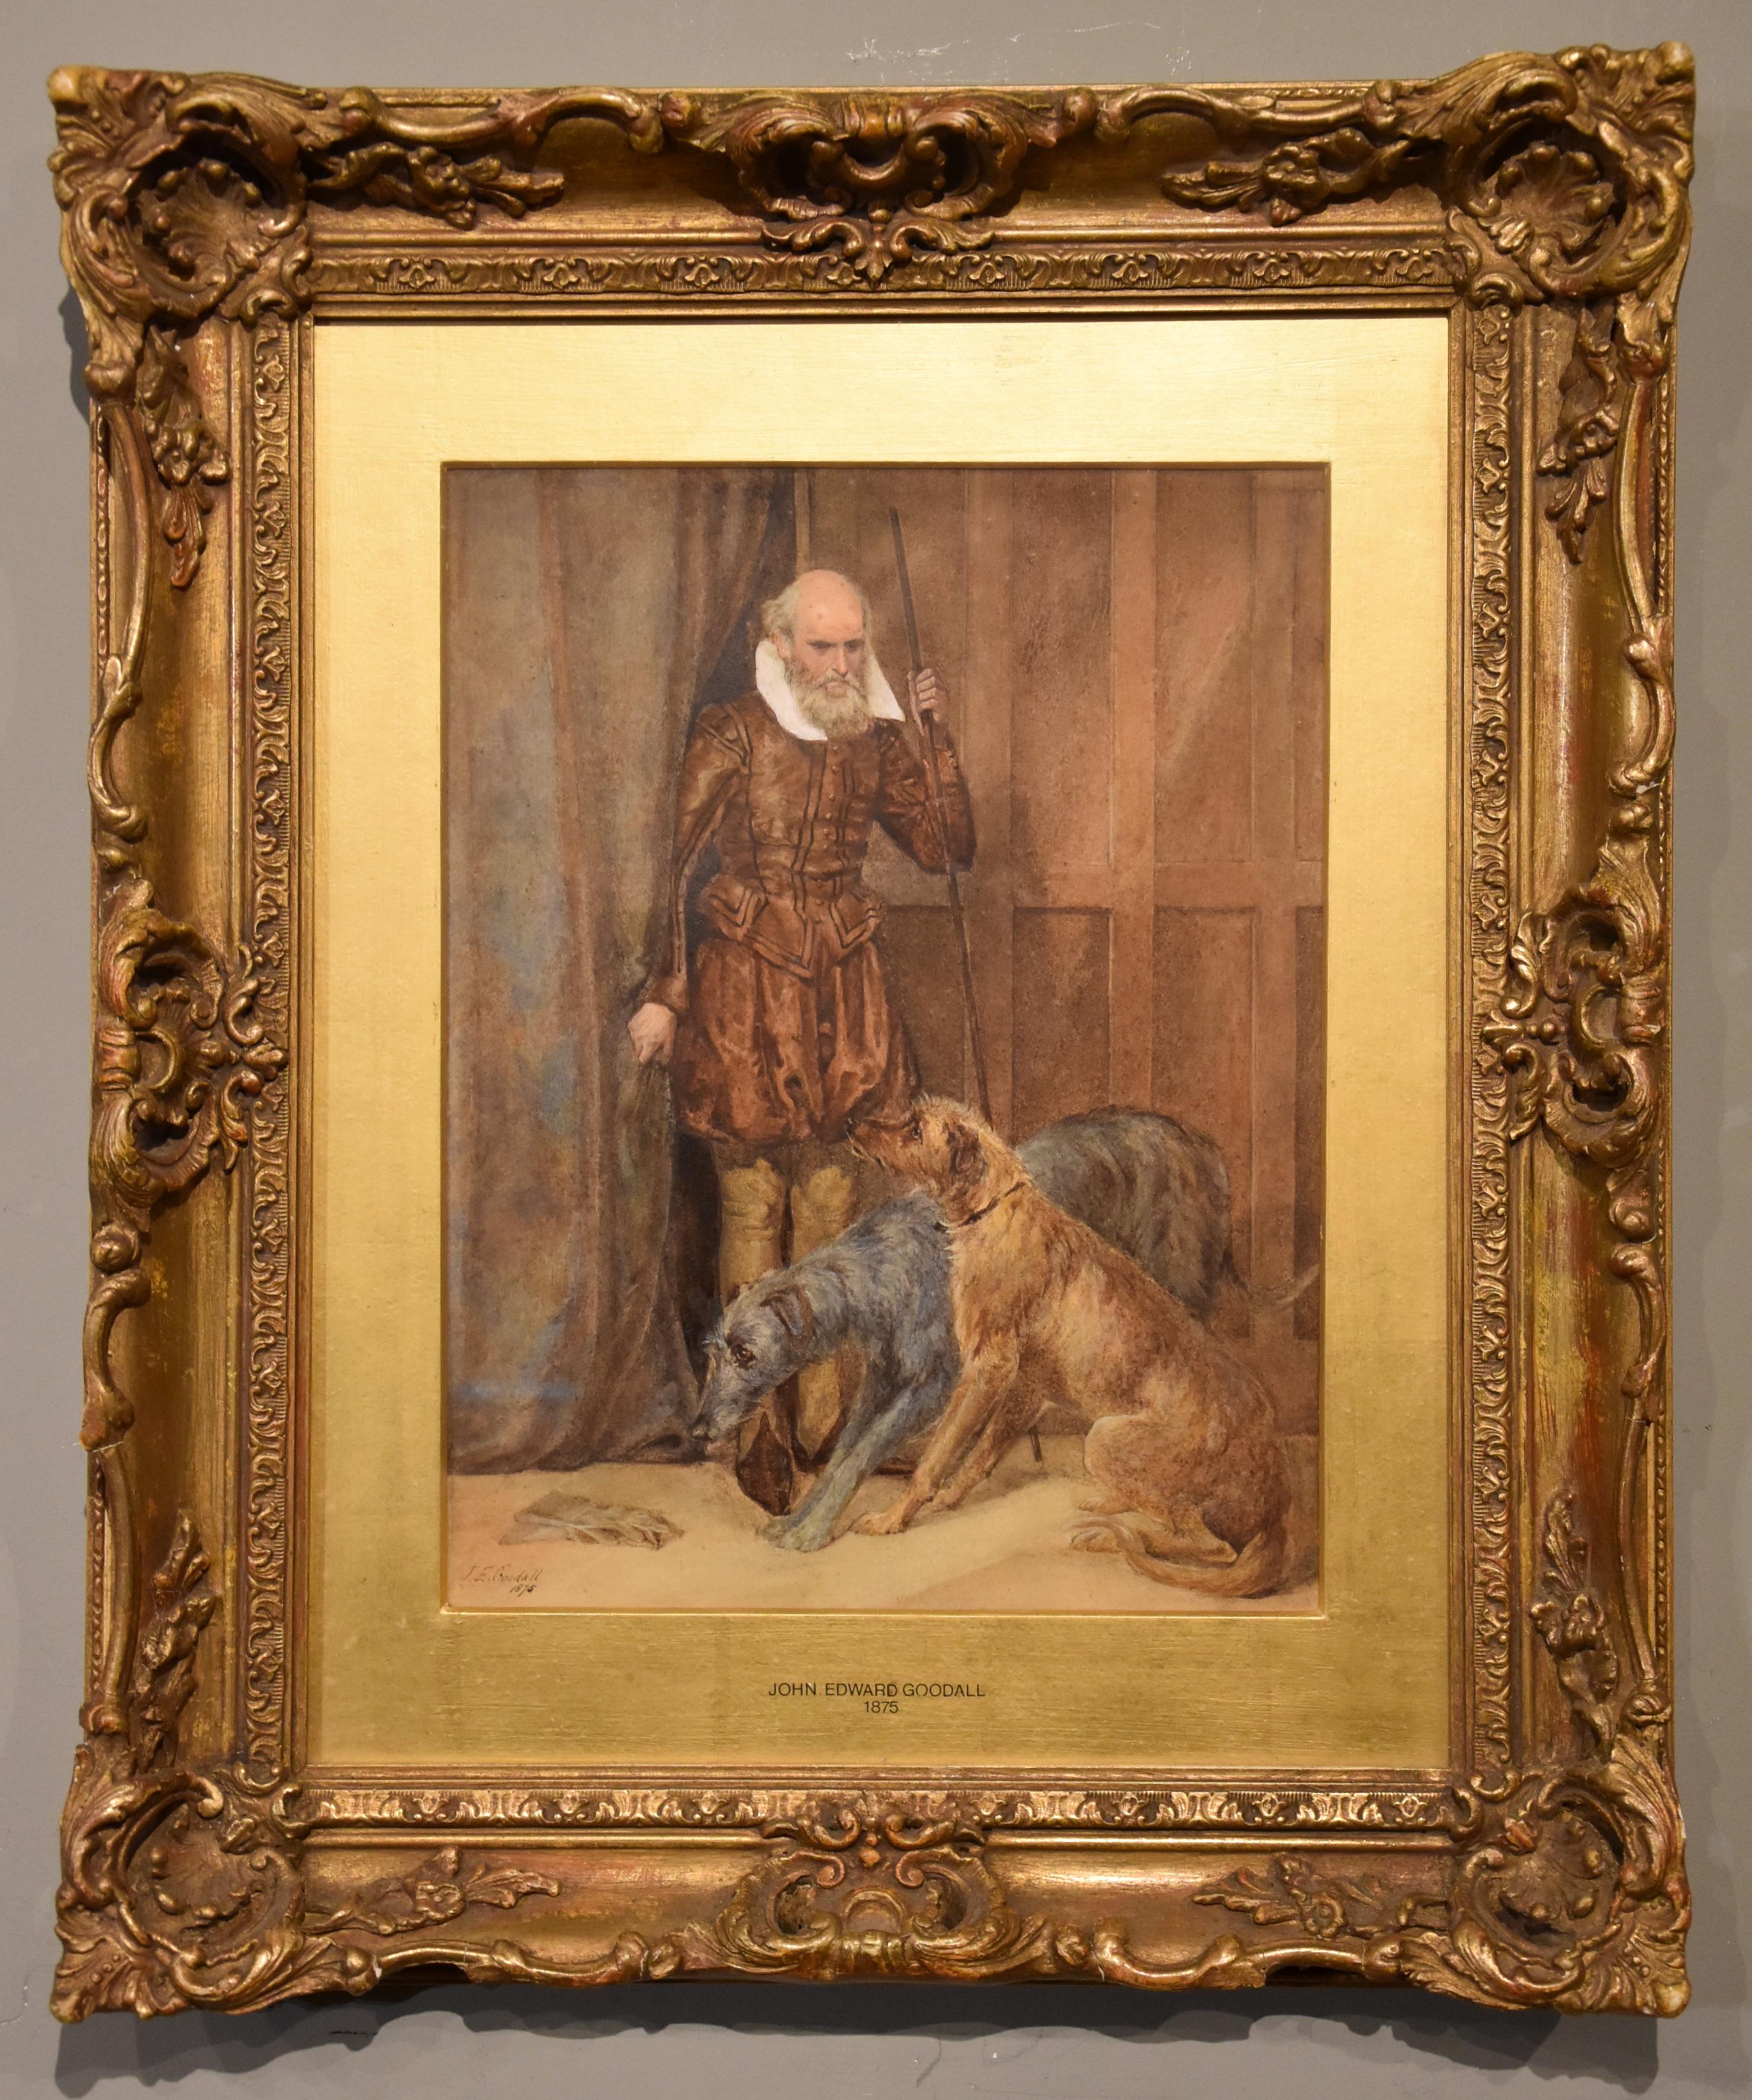 Watercolour by John Edward Goodall "The Keeper of the Hounds" 1875 -1901 John was a London painter of historical and rustic figurative scenes exhibiting 15works at the Royal society and 7 at the Royal Academy. Watercolour signed and dated